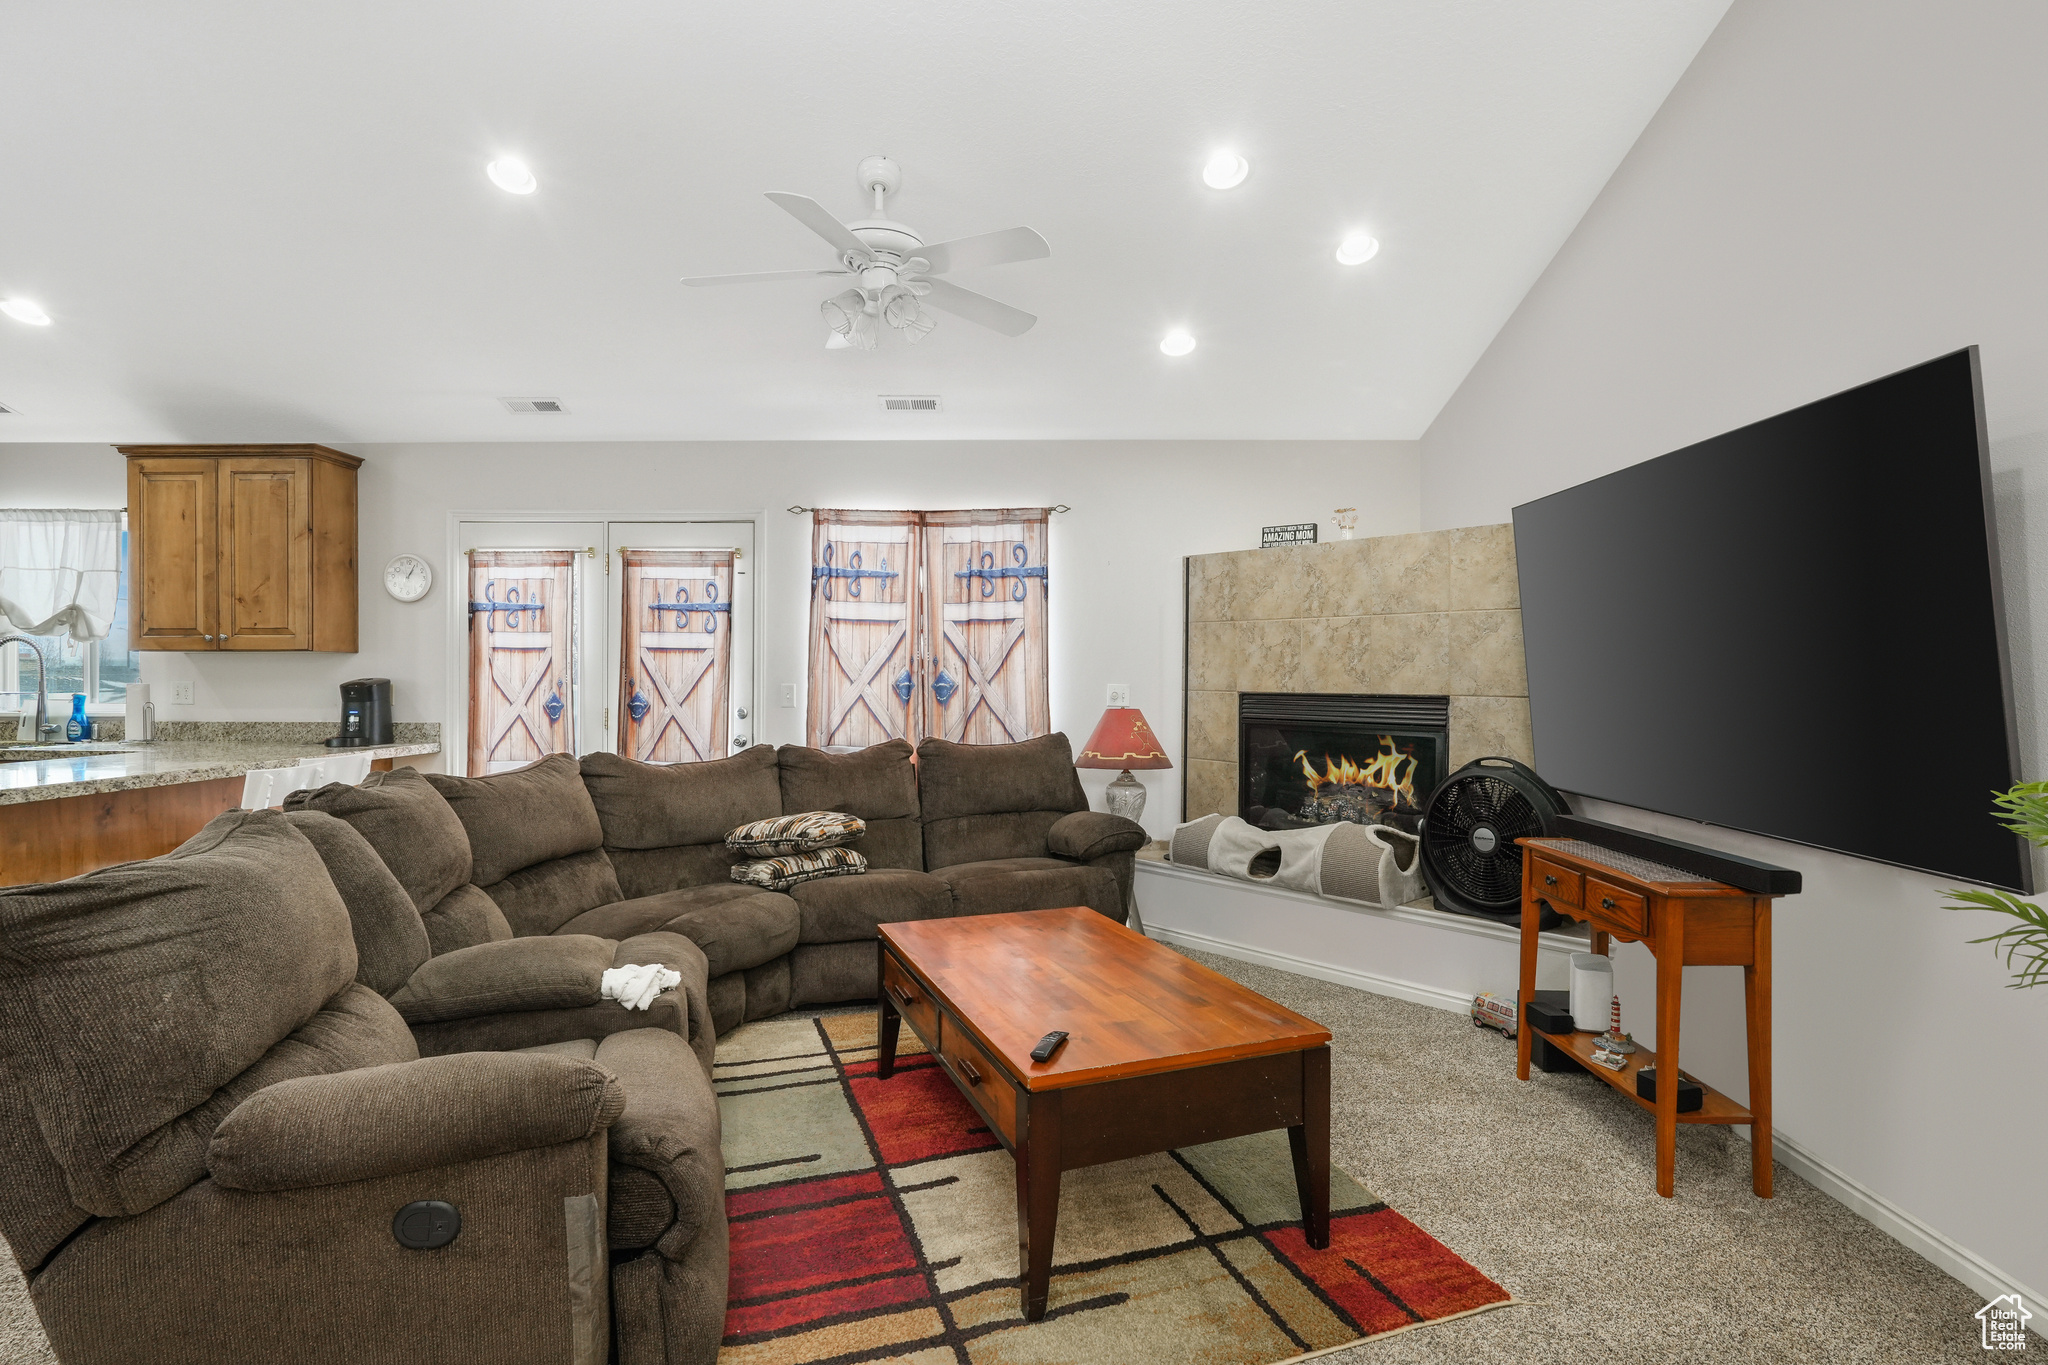 Living room featuring a tile fireplace, light carpet, ceiling fan, sink, and vaulted ceiling